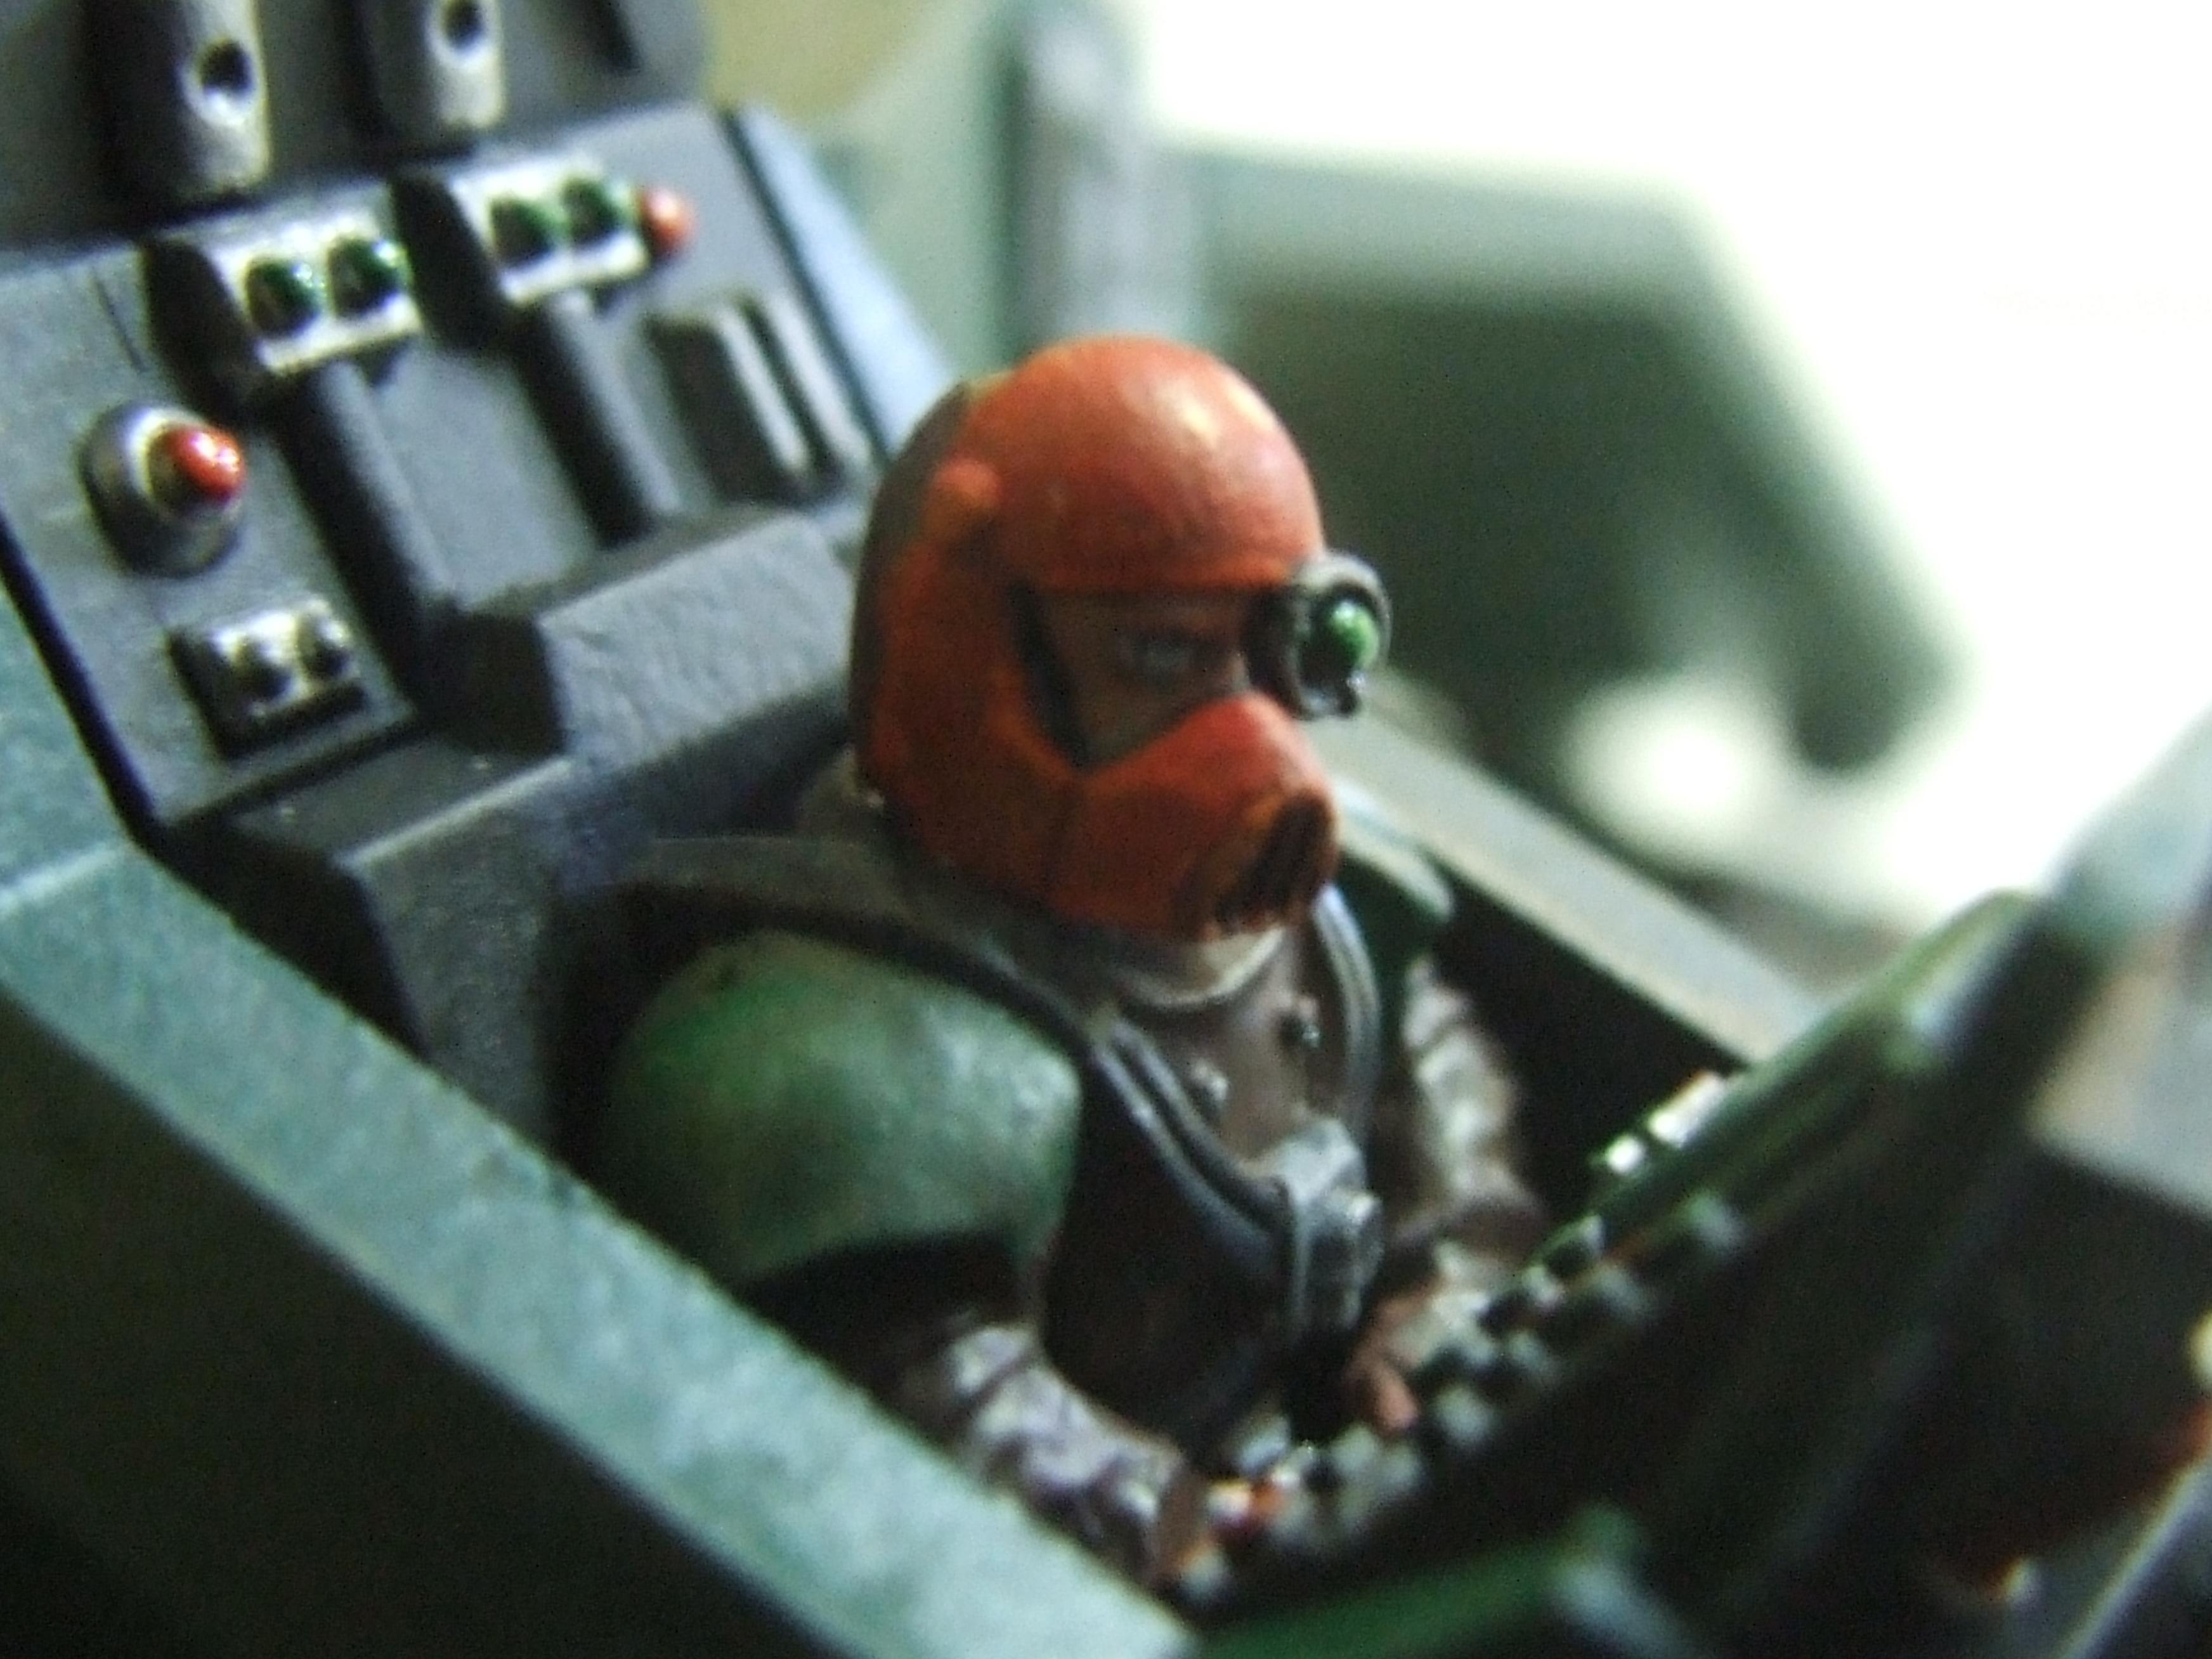 Cockpit, Imperial Guard, Pilots, Valkyrie, Warhammer 40,000